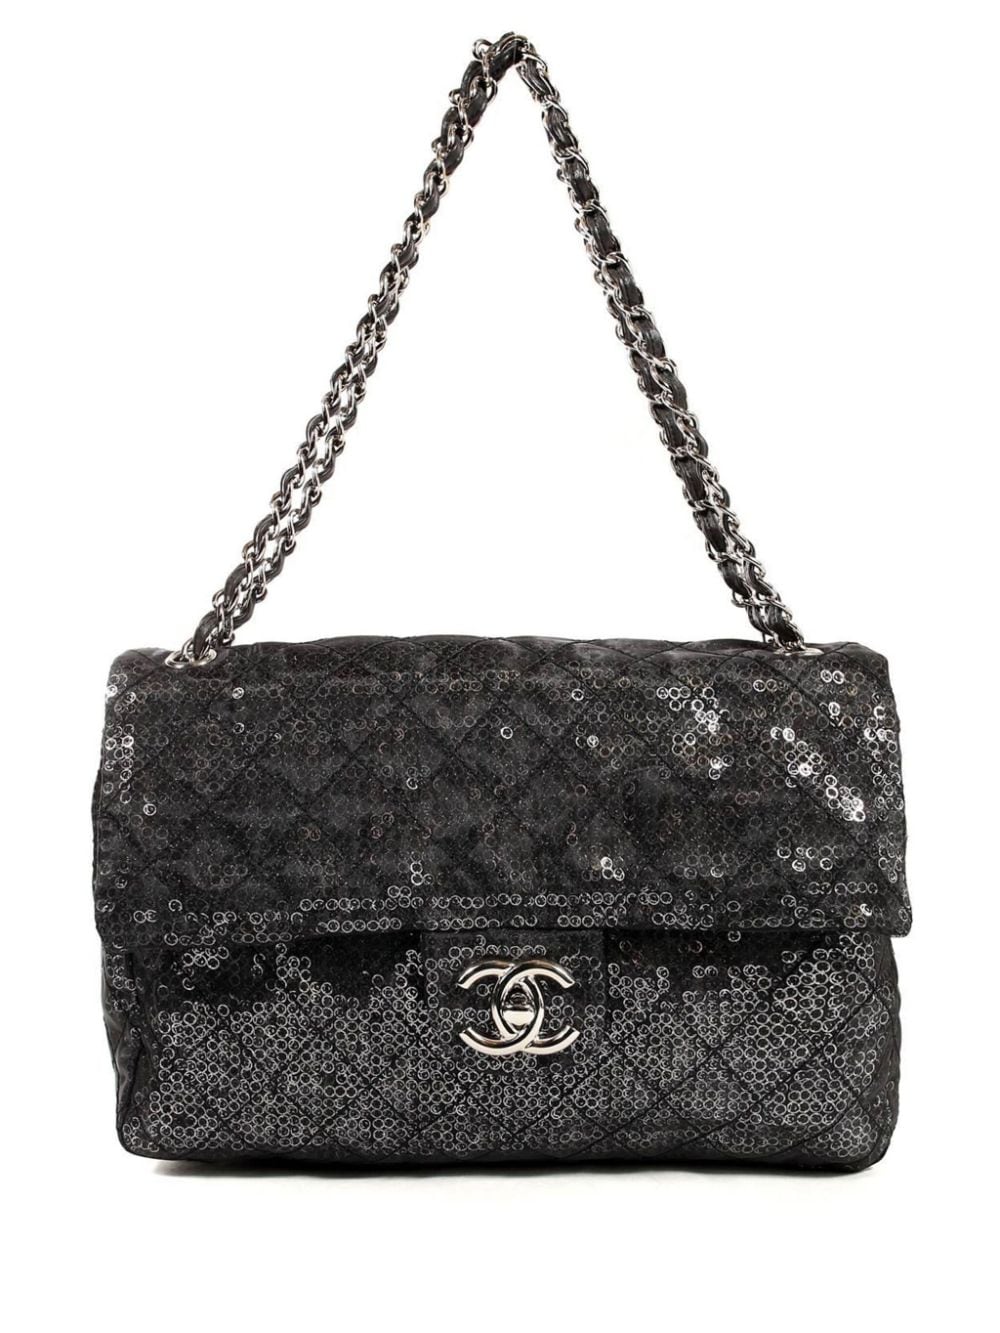 Pre-owned Chanel 2009 Jumbo Classic Flap Shoulder Bag In Black